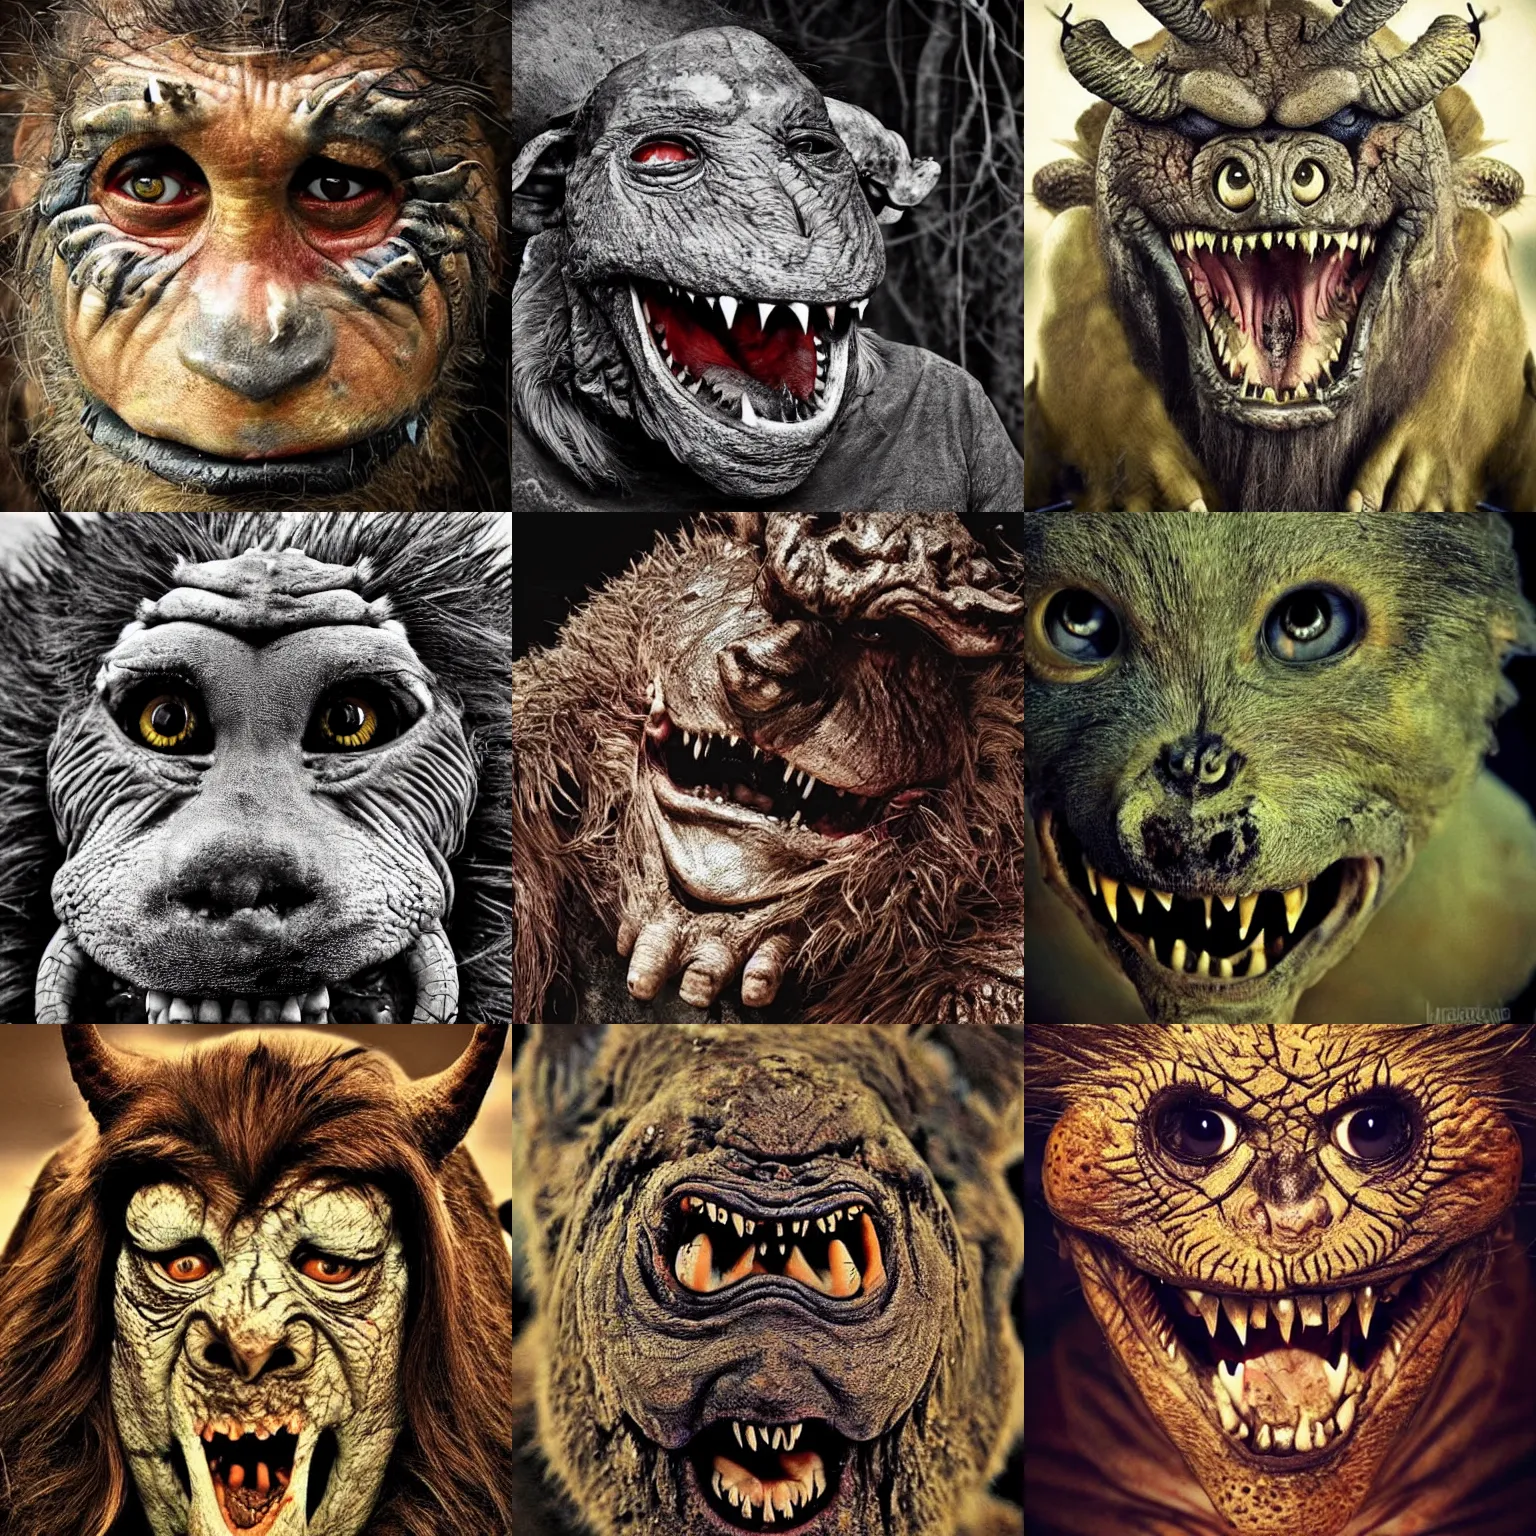 Prompt: vivid, grotesque faces. intense expression, wild eyes. Happy creature. a wonderful, large friendly monster with good intentions.